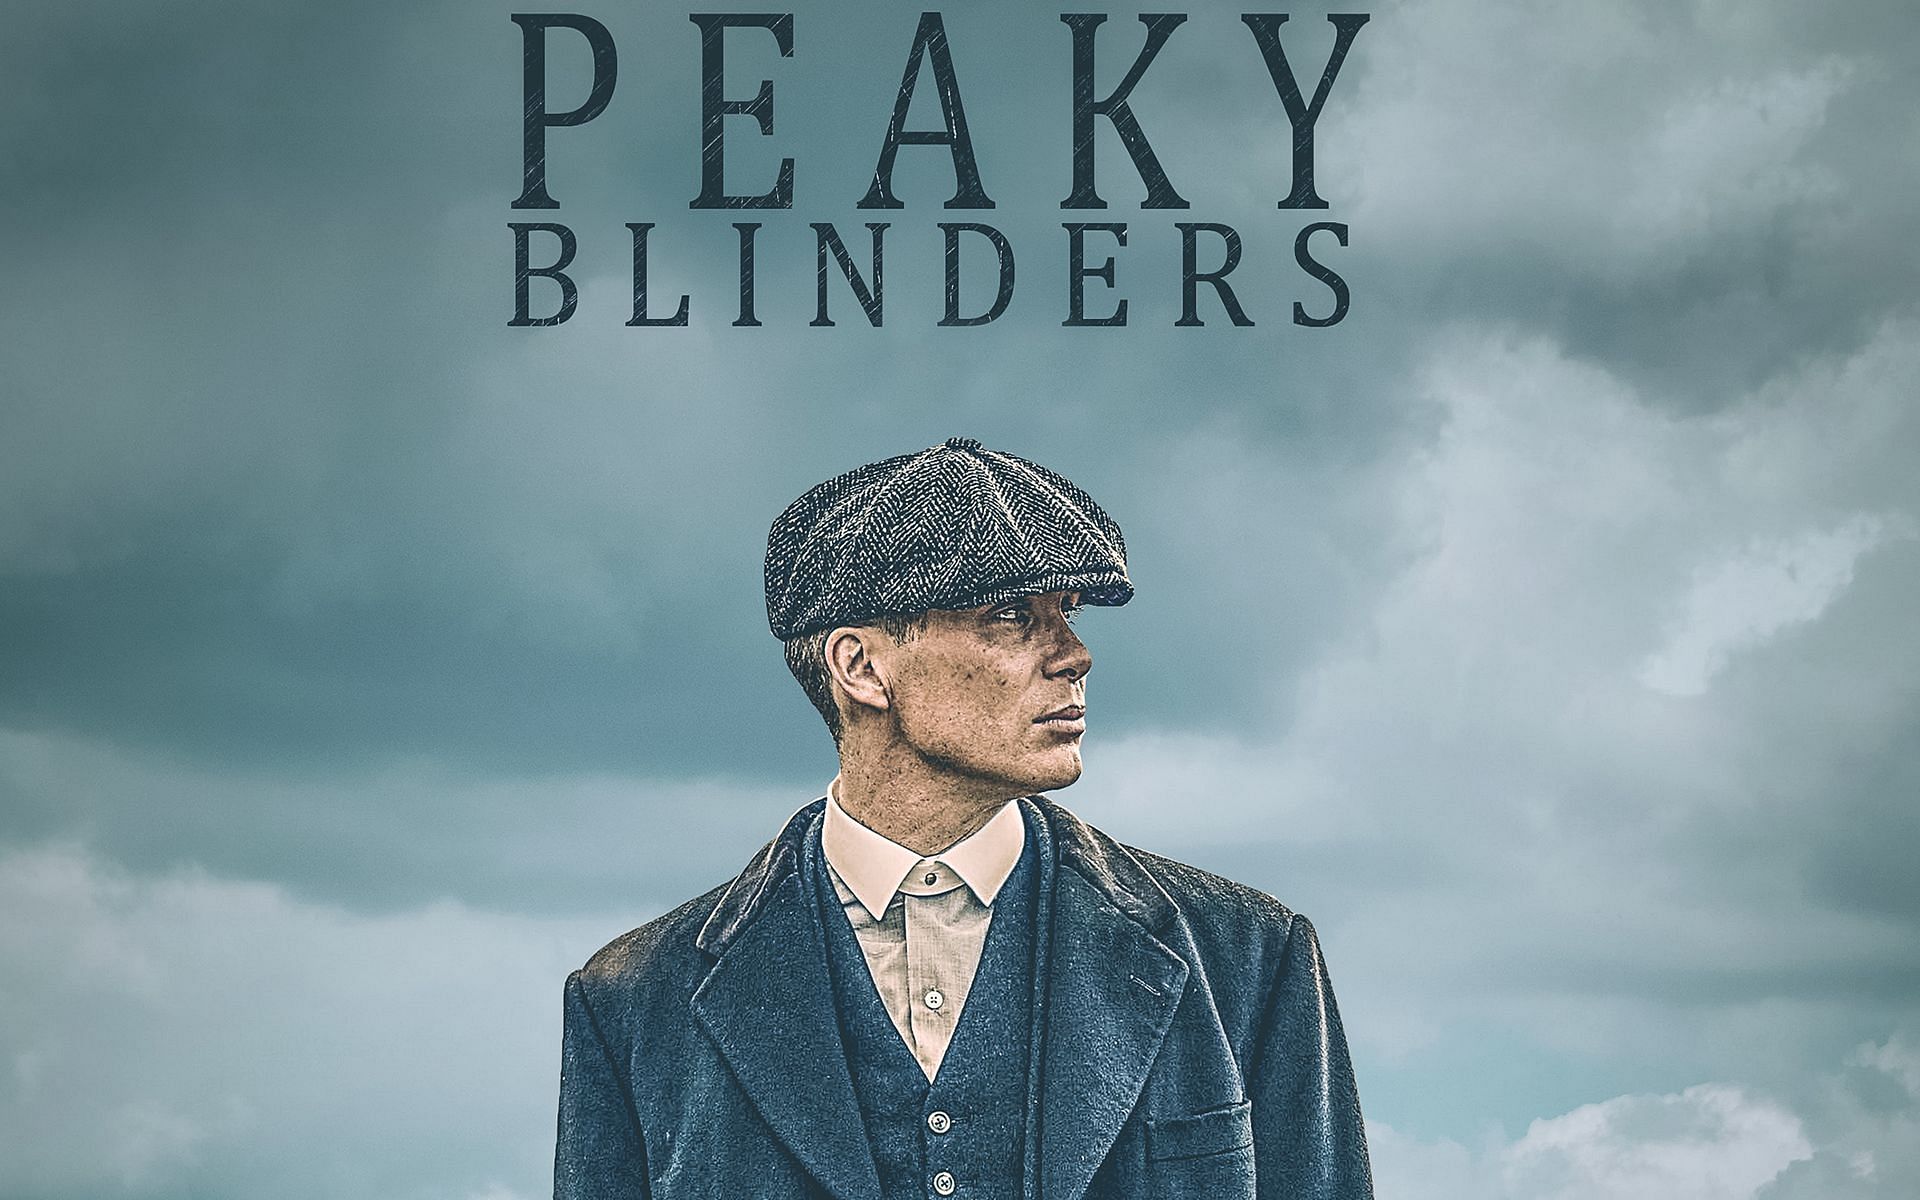 The Peaky Blinders feature film will be set during WWII as per director Steven Knight (Image via IMDb)